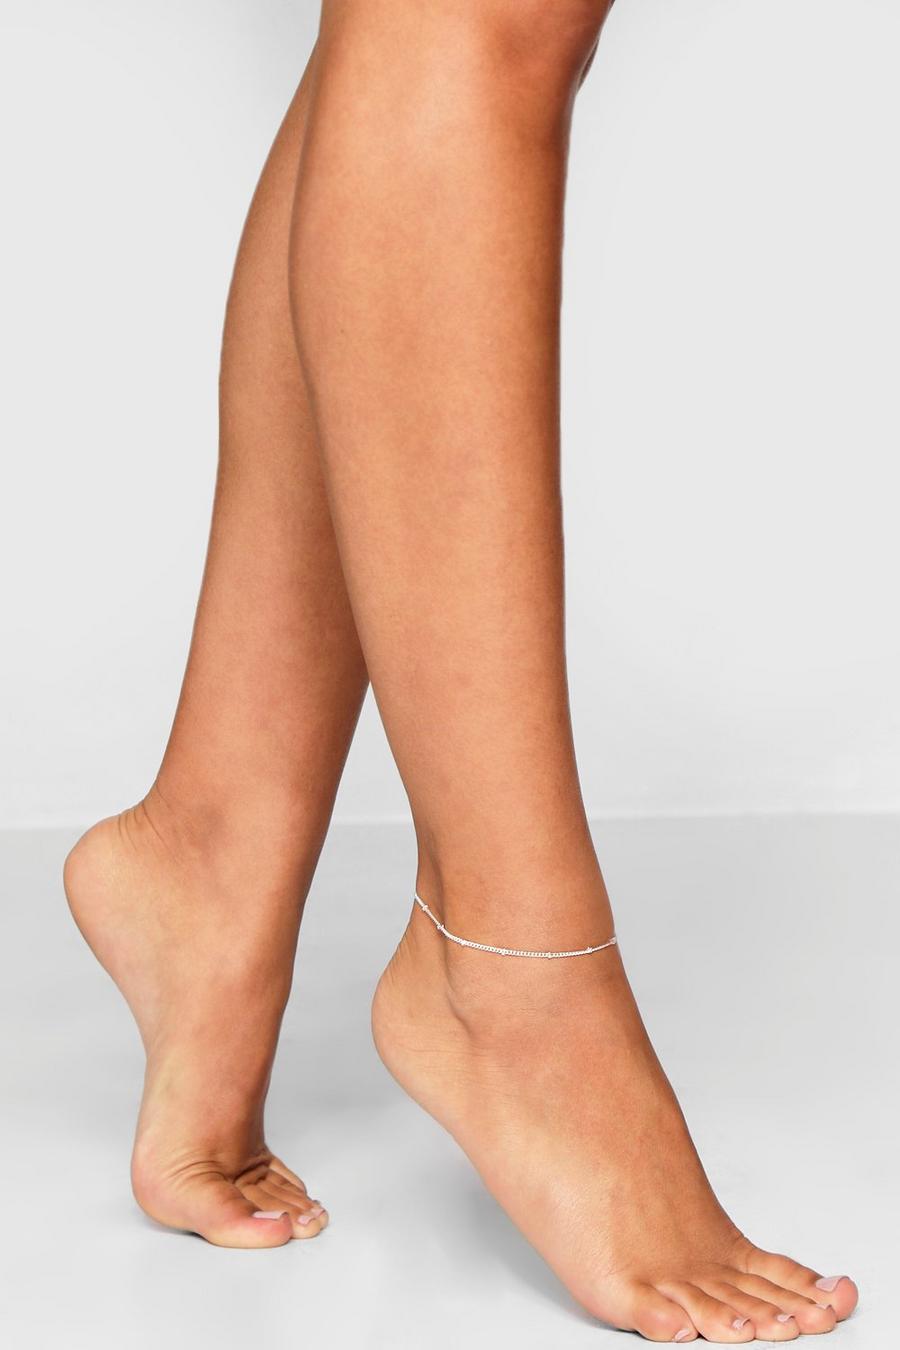 Silver Simple Chain Anklet